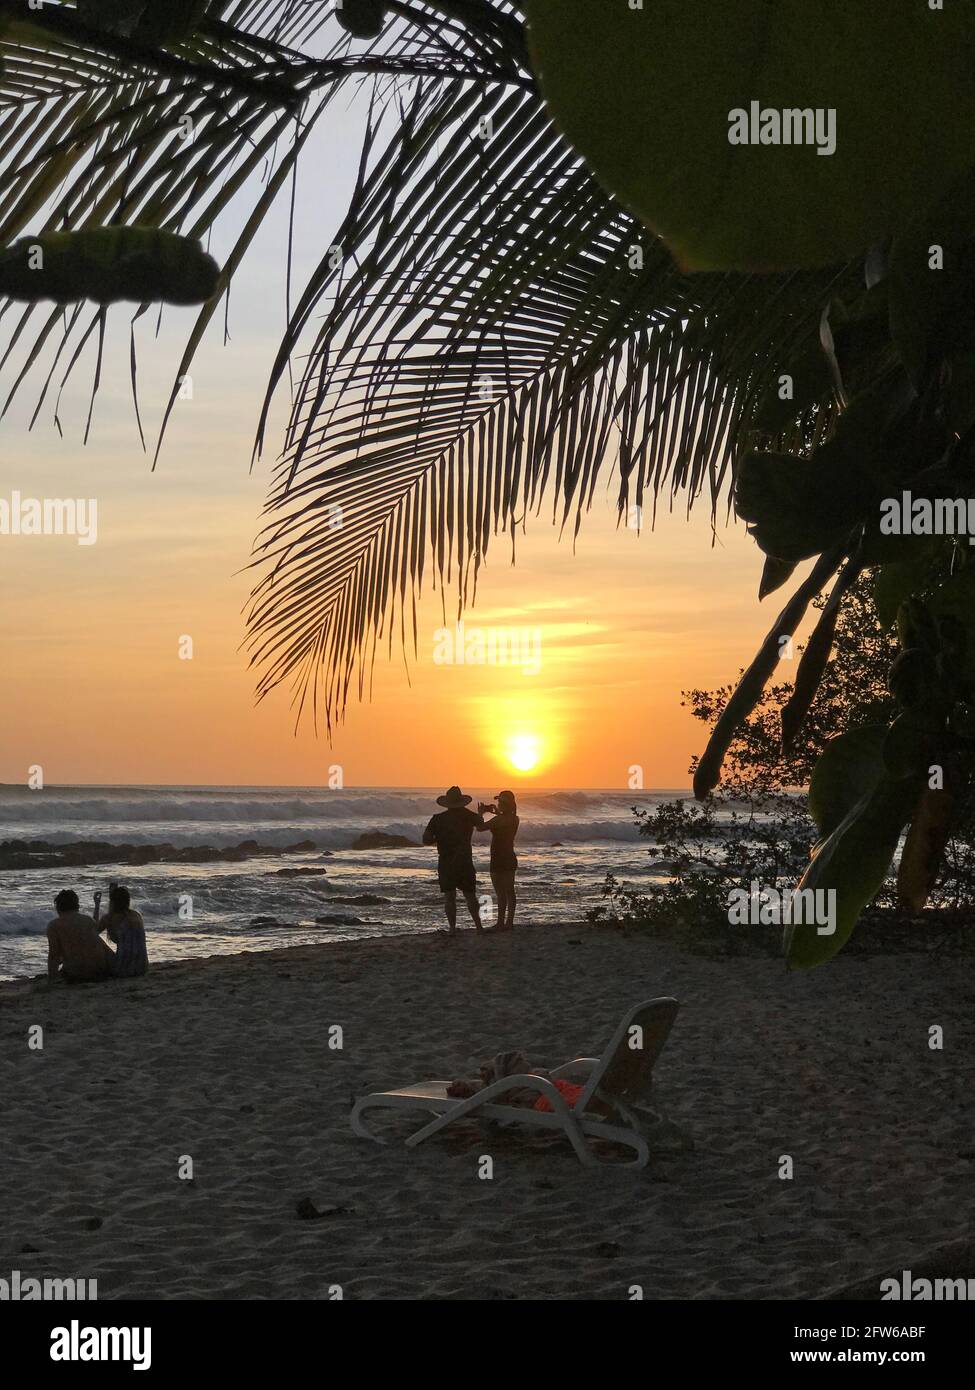 People enjoying the sunset from a beach in Costa Rica Stock Photo